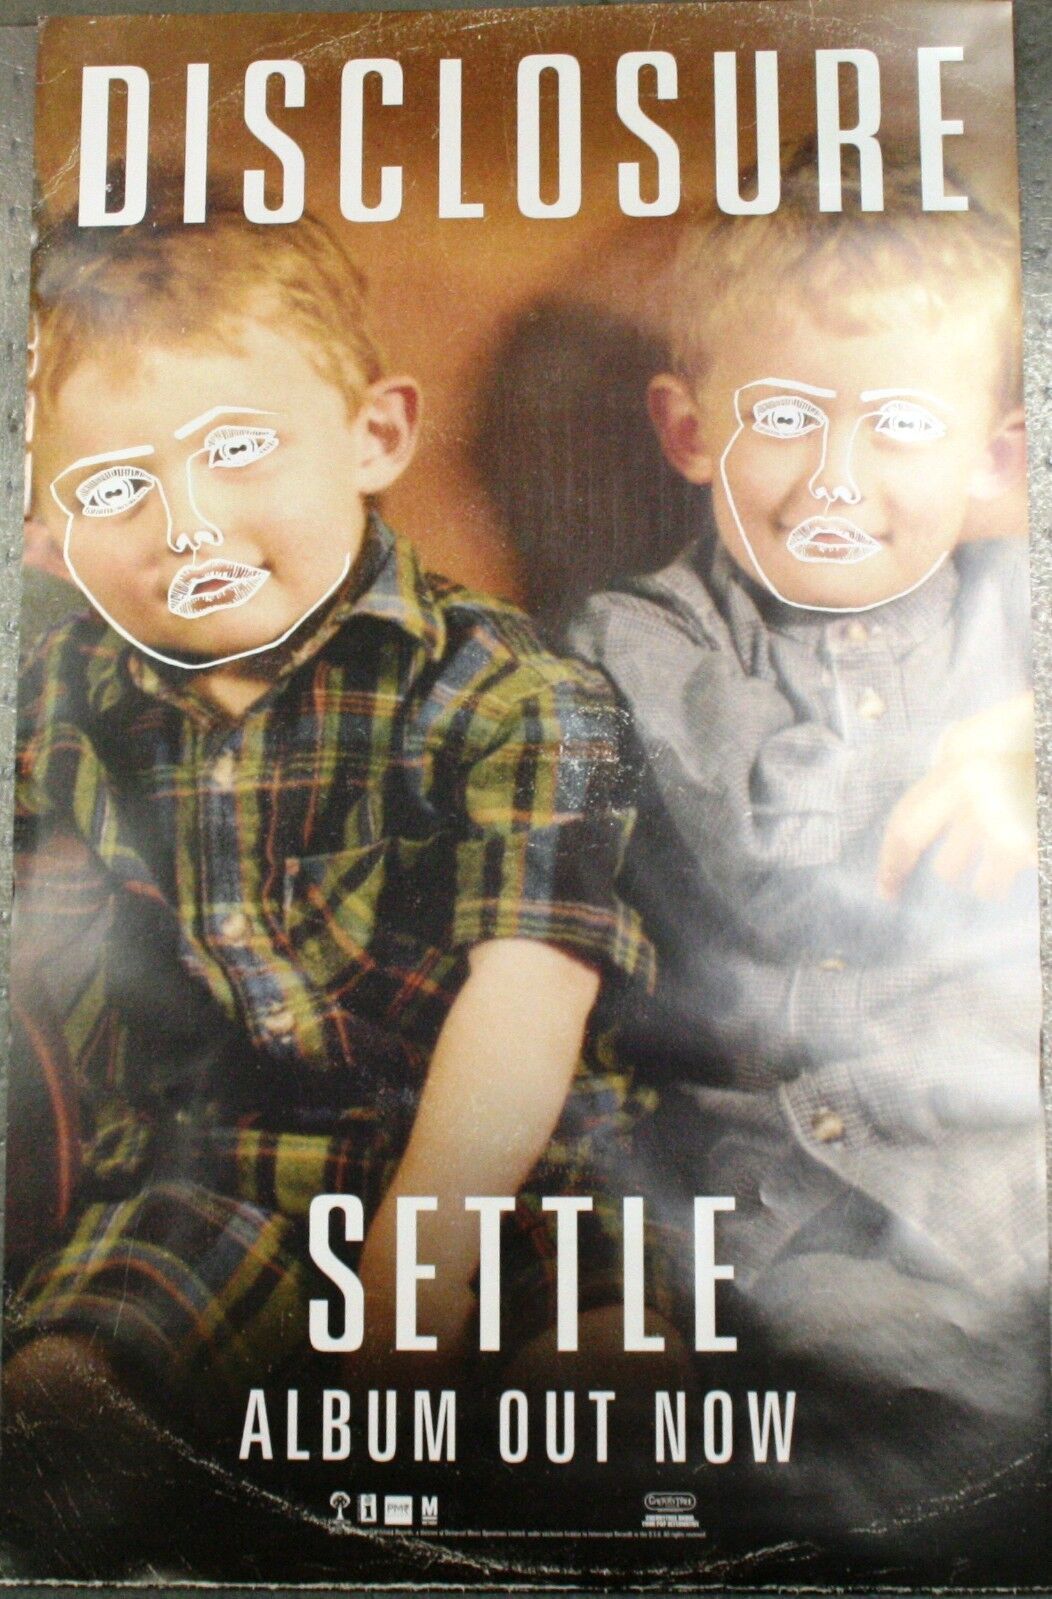 DISCLOSURE SETTLE 14X22 DOUBLE SIDED POSTER RARE PROMO